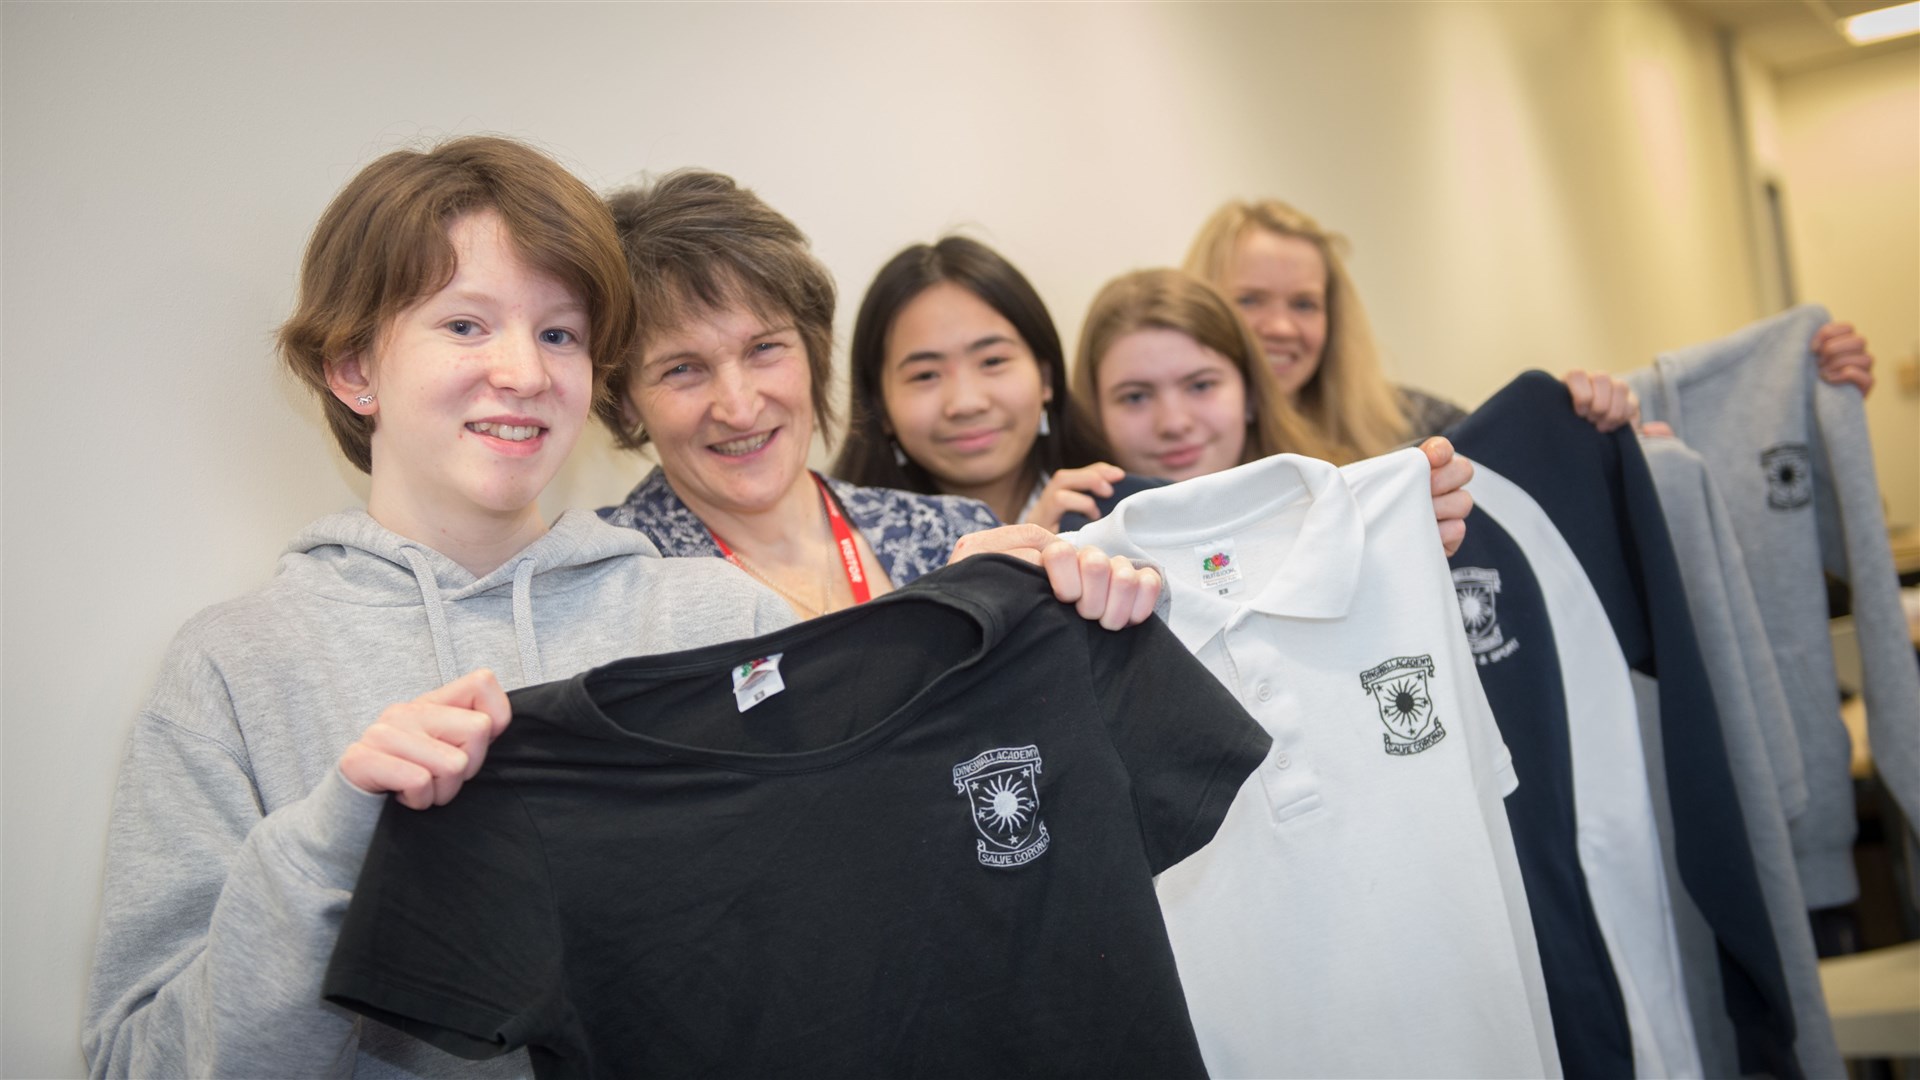 Dingwall Academy students set to arrange a pop-up shop at their forthcoming spring fair to sell used uniforms as a way to make some money for school funds and be environmentally friendly. ..Rhea Porter (s3), Lizbeth Collie (Parent), Emily Tham (s3), Lauren Blakburn (s3) and Karen O'hanlon (Parent Council)...Picture: Callum Mackay. Image No. 043299.